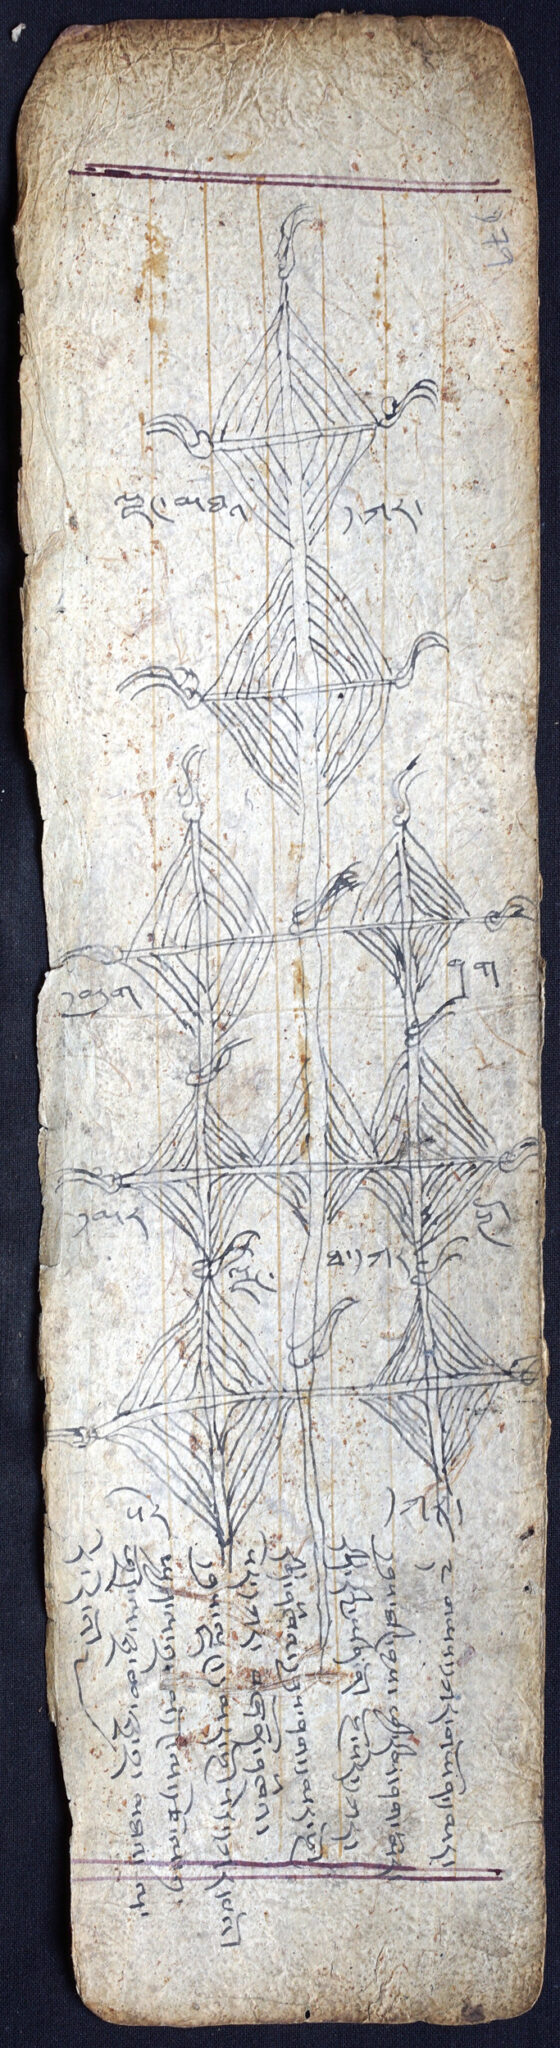 Line drawing on rectangular folio depicting nine lozenge-shaped objects above vertical lines of text